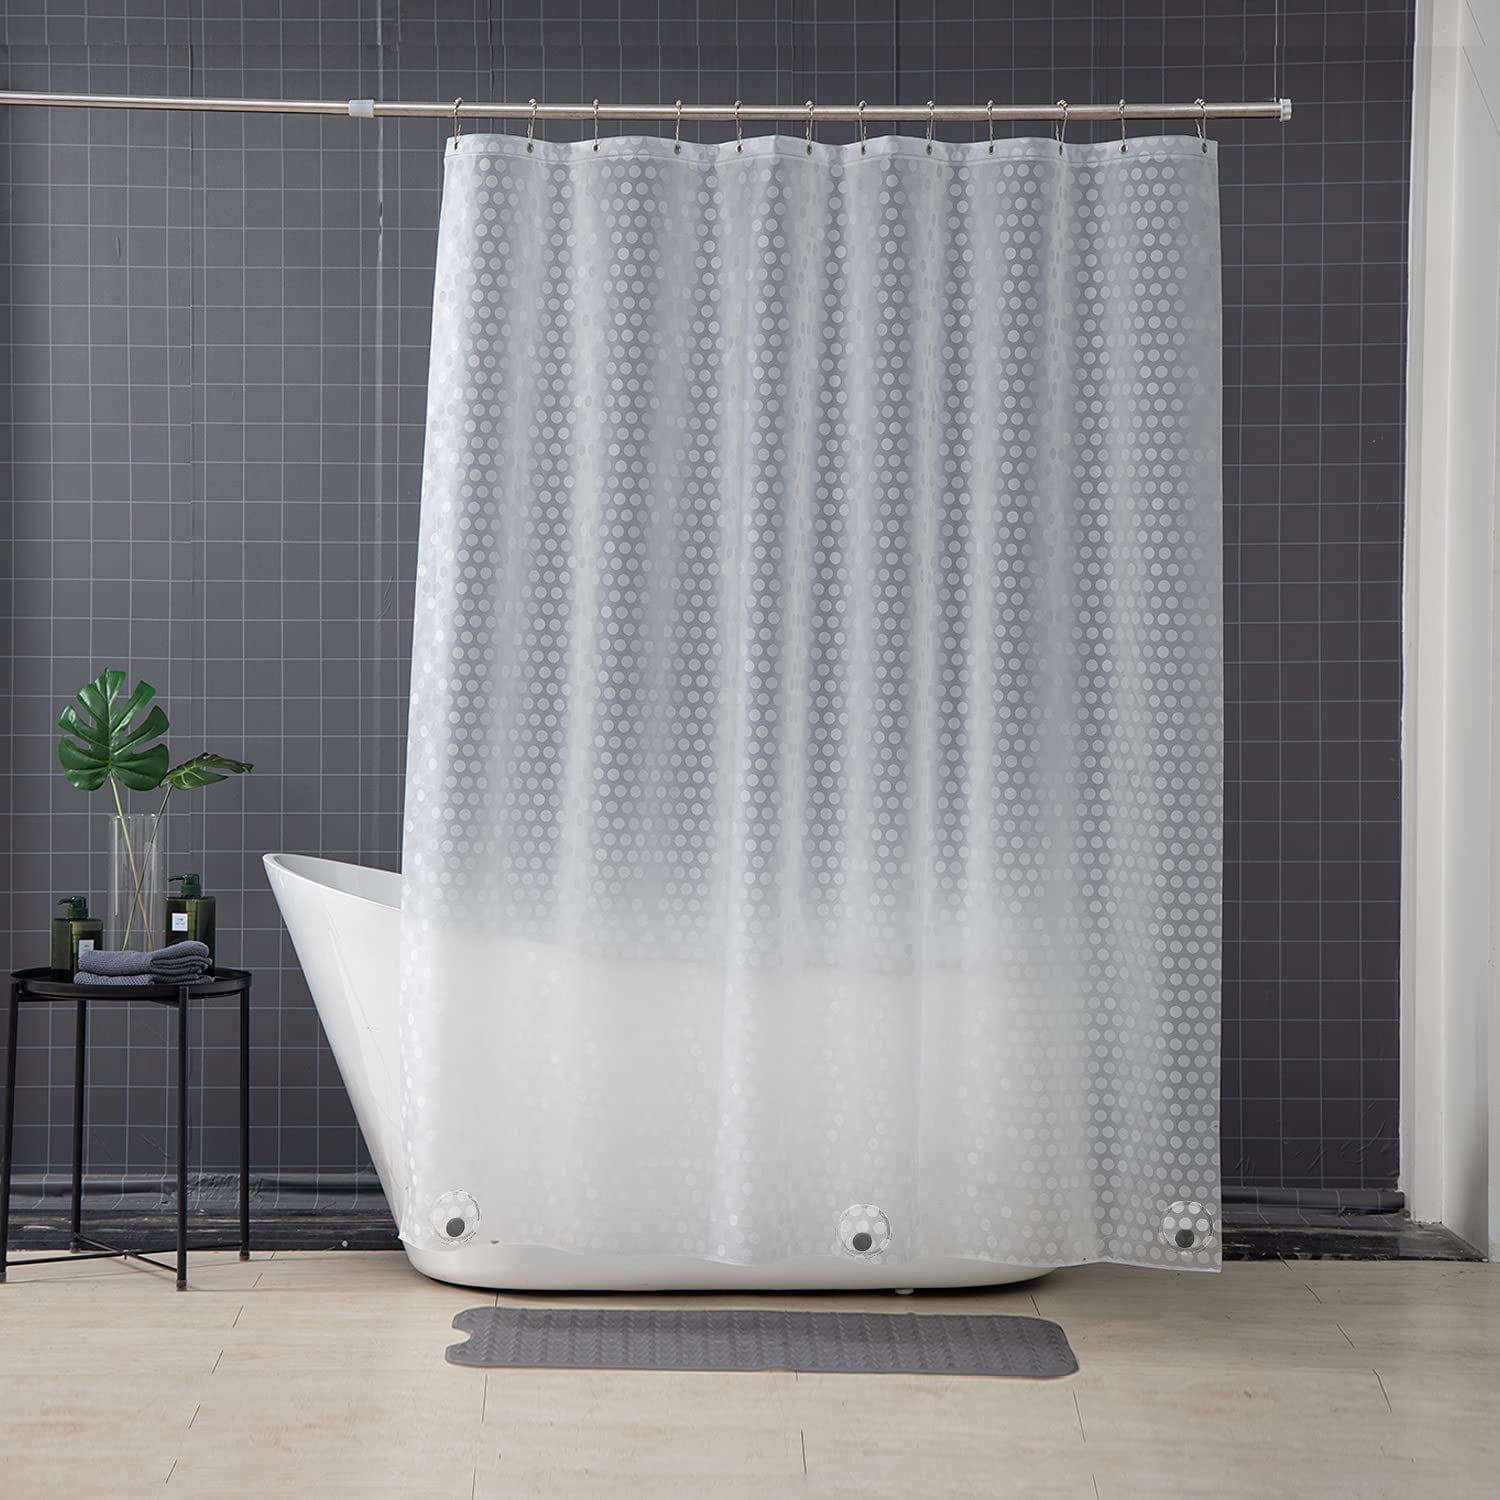 Details about   Waterproof Fabric Shower Curtain Liner Long Thick Bathroom Bathtub Home Decor 